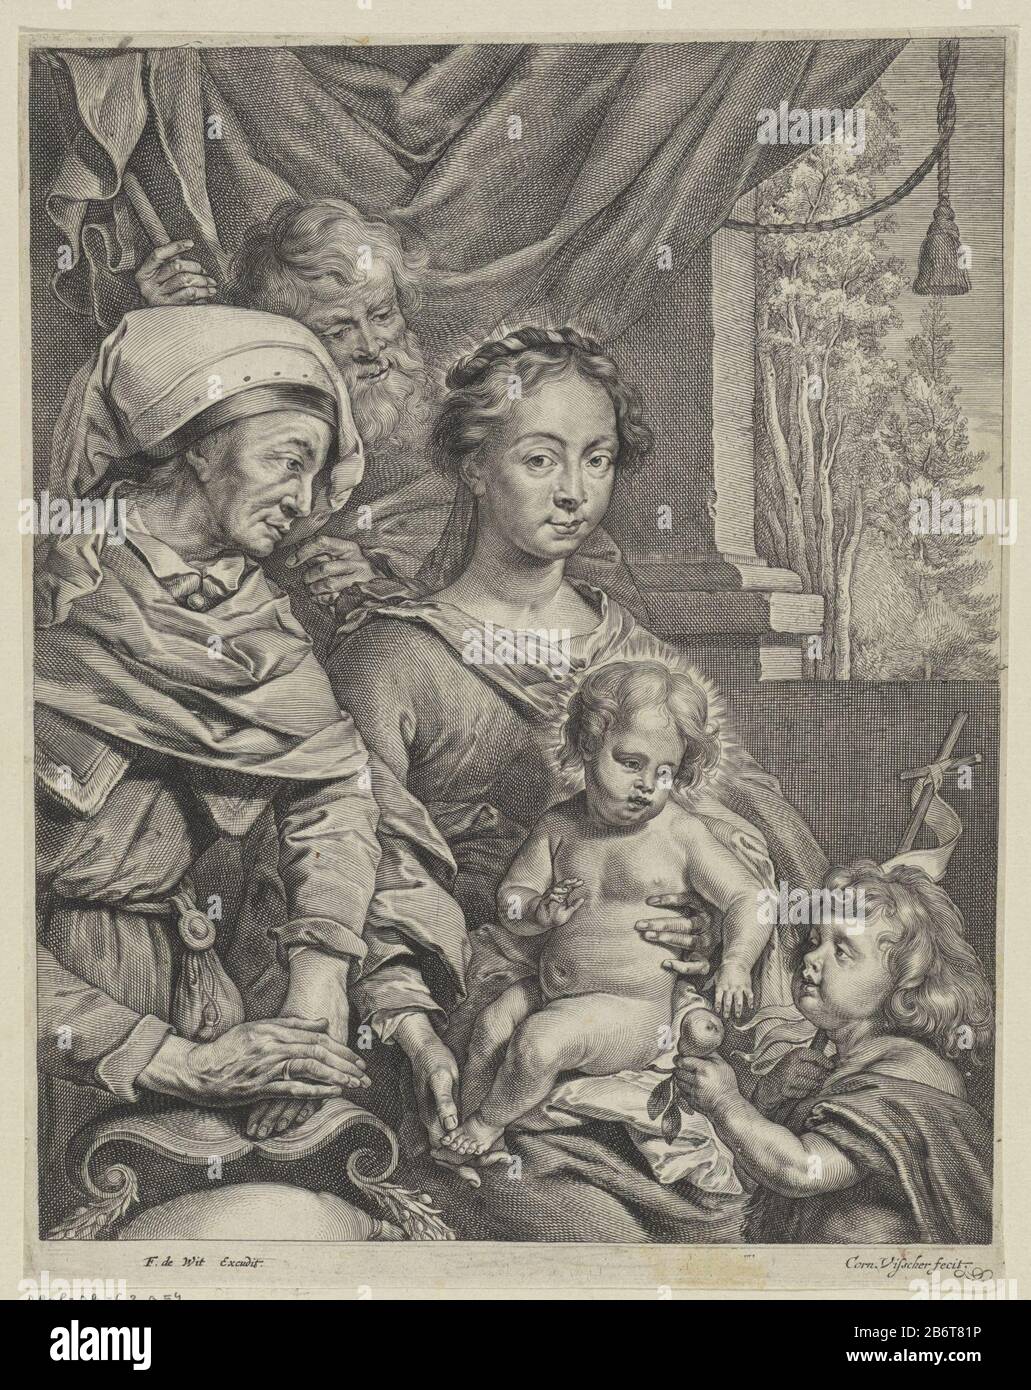 Heilige Familie met Elisabet en Johannes The Holy Family with Elizabeth and John the Baptist as a child. John, ha in his hand a standard, represents the BC Child and hands him a peer aan. Manufacturer : print maker: Cornelis Visscher (II) (referred to on object) to a design of: Jacopo Palma (il Vecchio) (possible) publisher: Frederik de Wit (listed property) Place manufacture: printmaker: Haarlem Publisher: Amsterdam Date: 1638 - 1706 Physical features: engra and etching material: paper Technique: engra (printing process) / etch dimensions: sheet: h 303 mm × W 234 mm Subject: Holy Family with Stock Photo